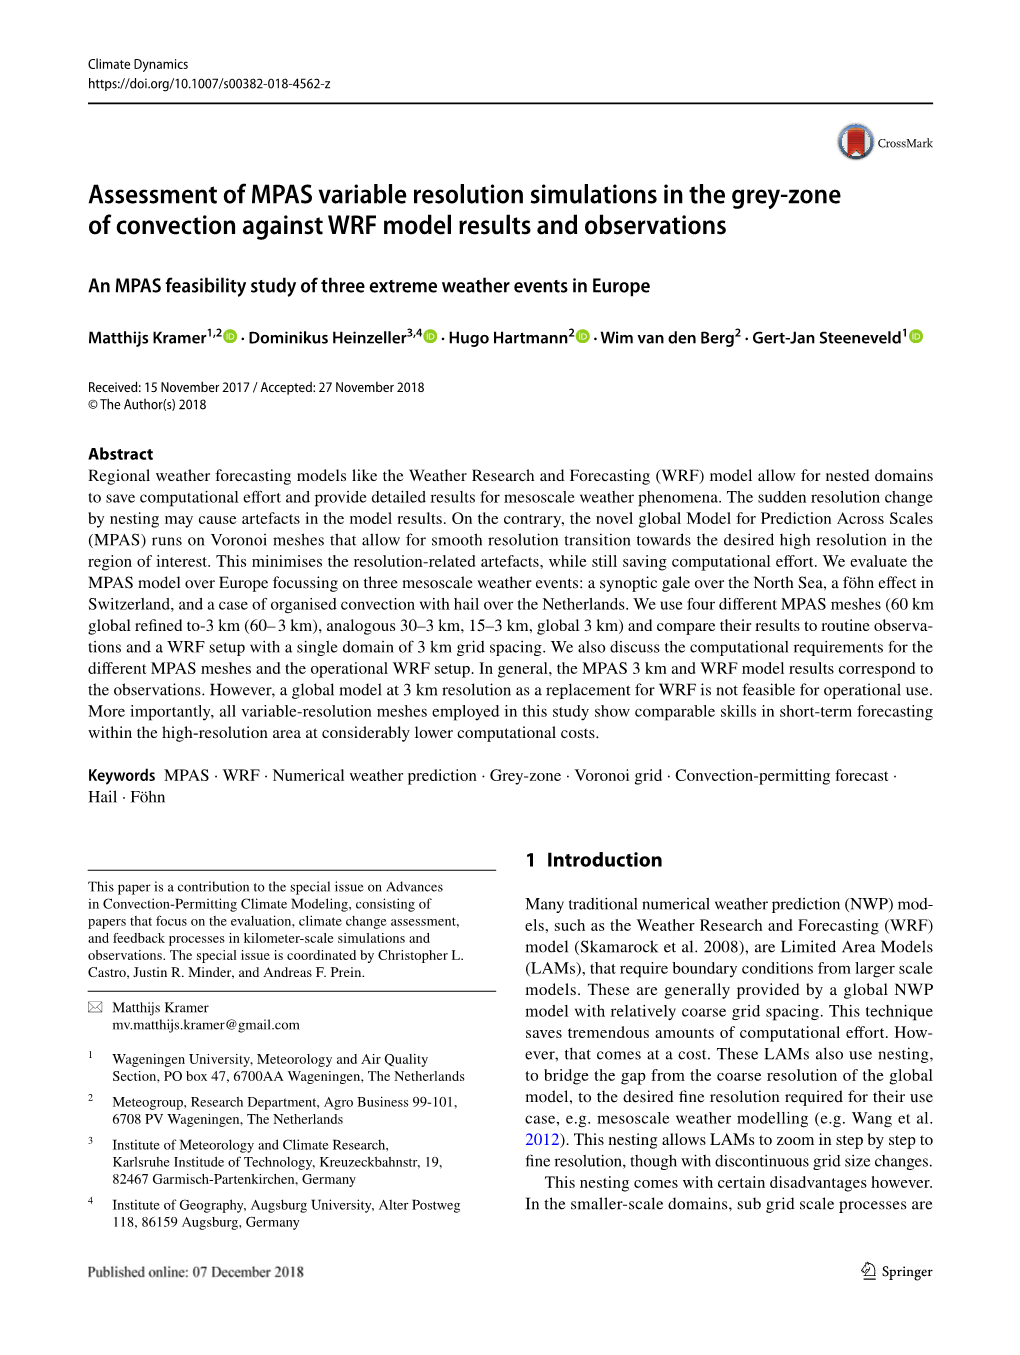 Assessment of MPAS Variable Resolution Simulations in the Grey-Zone of Convection Against WRF Model Results and Observations